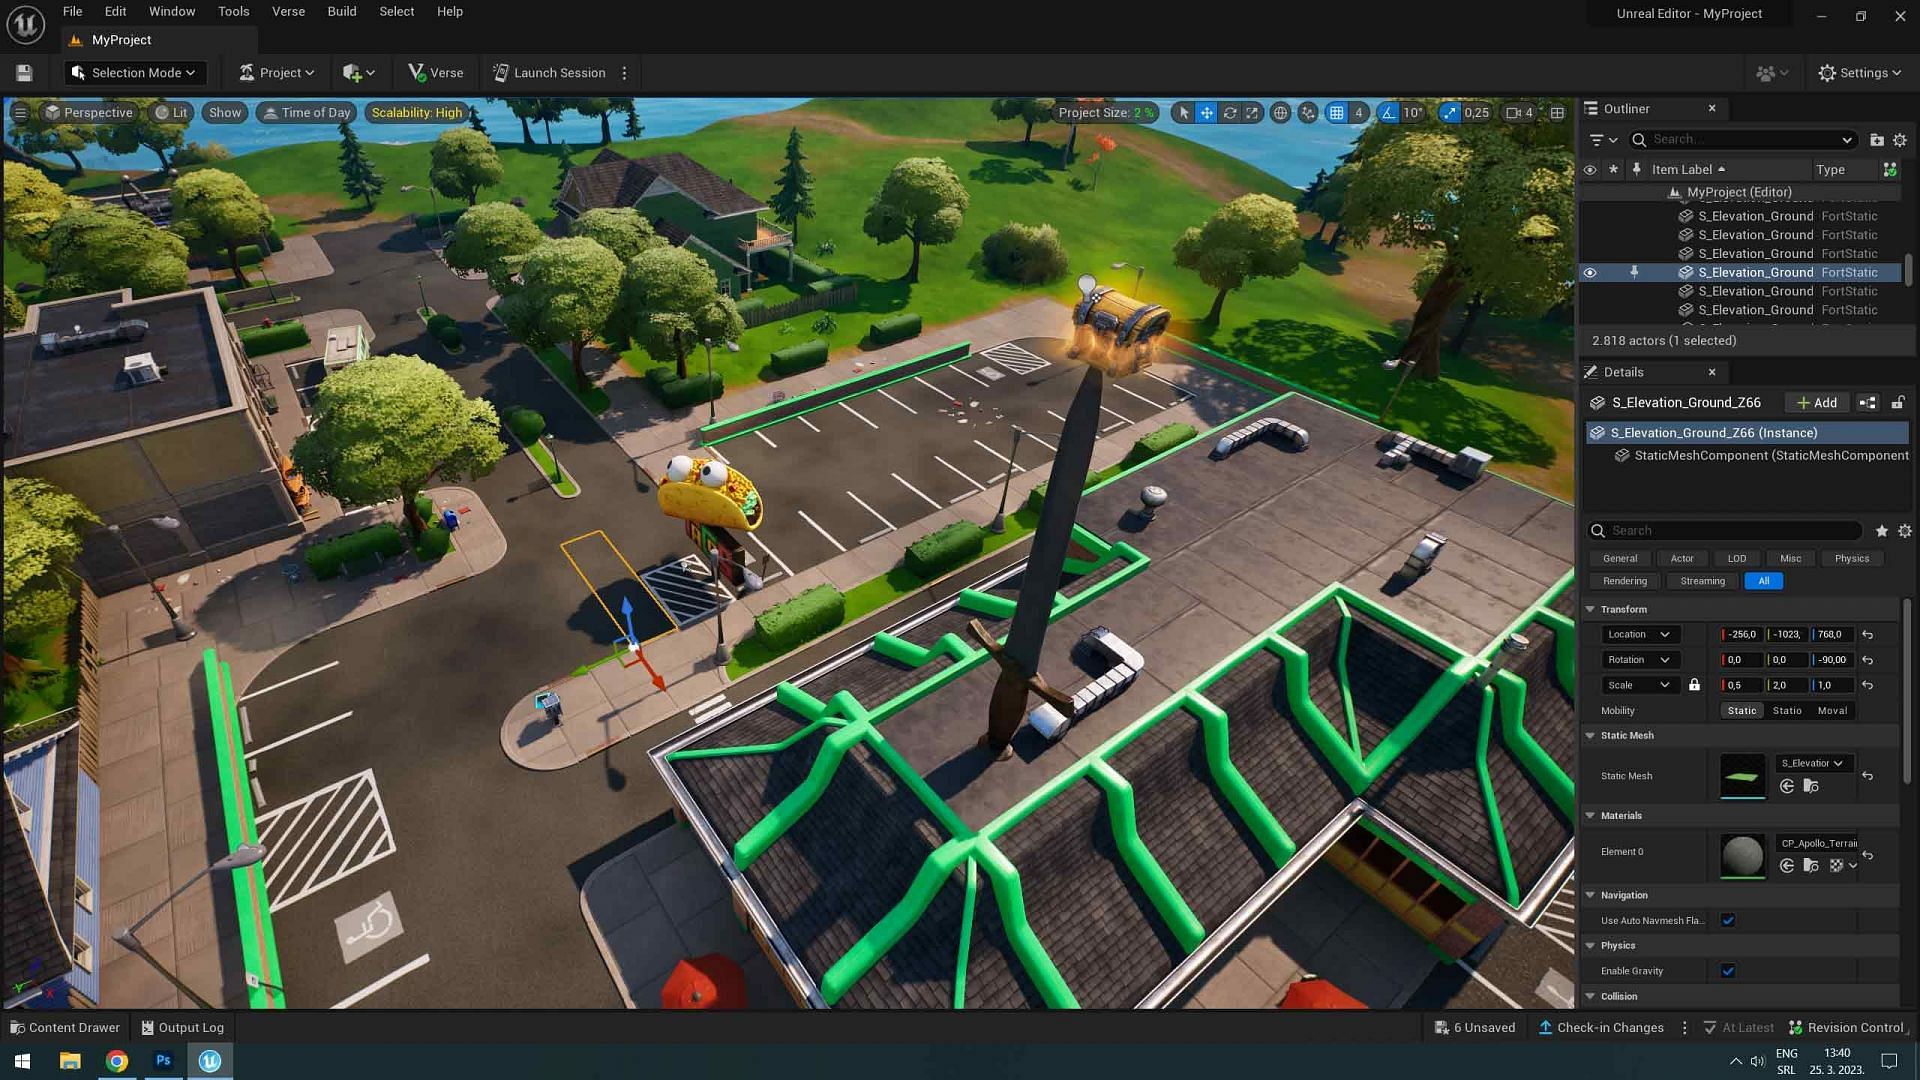 Fortnite Creative 2.0 offers numerous possibilities (Image via Epic Games)